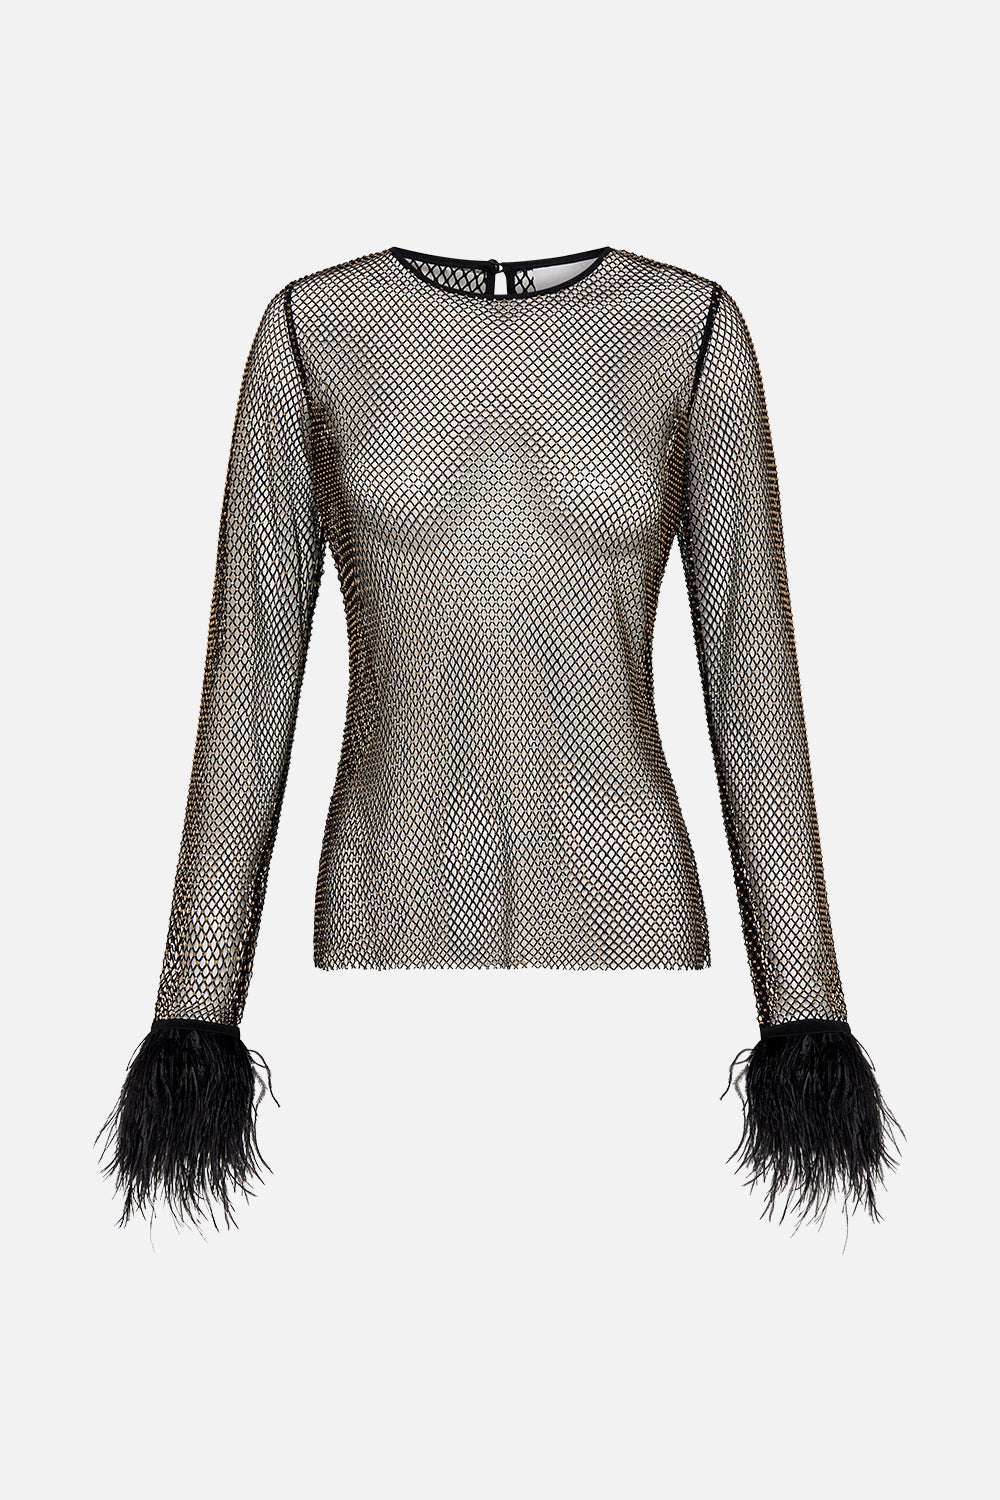 Crystal Mesh Top With Feathers - Soul Of A Star Gazer